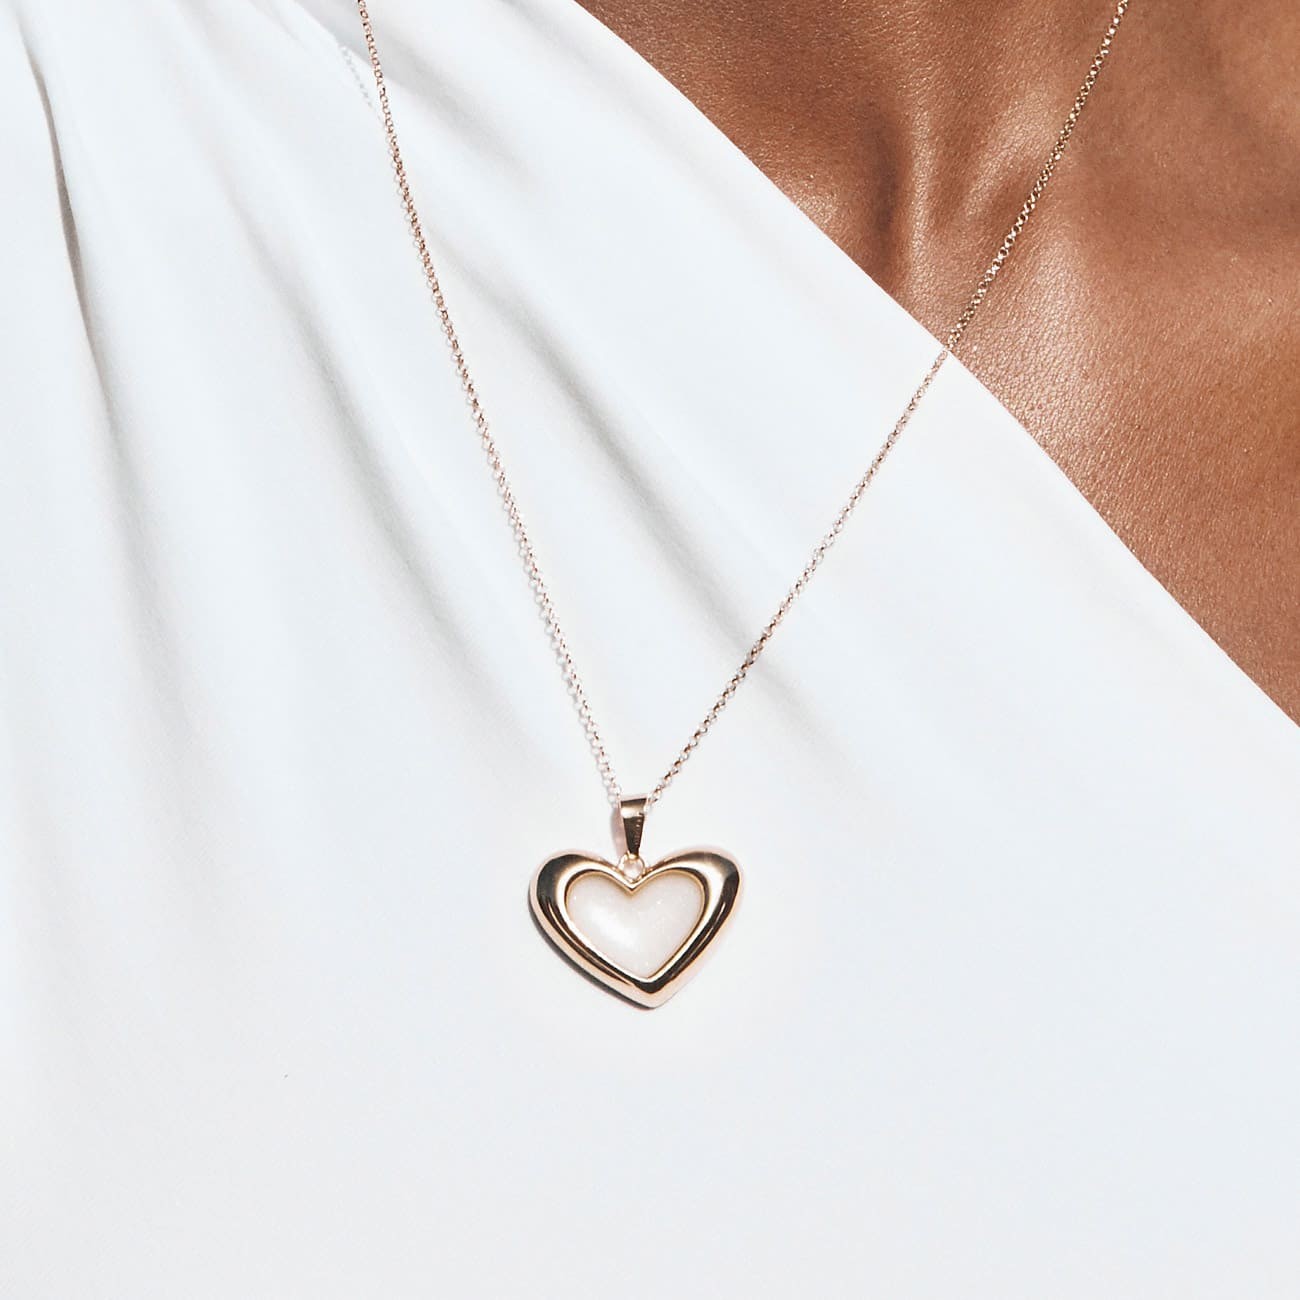 White resin asymmetrical heart necklace, sterling silver 925